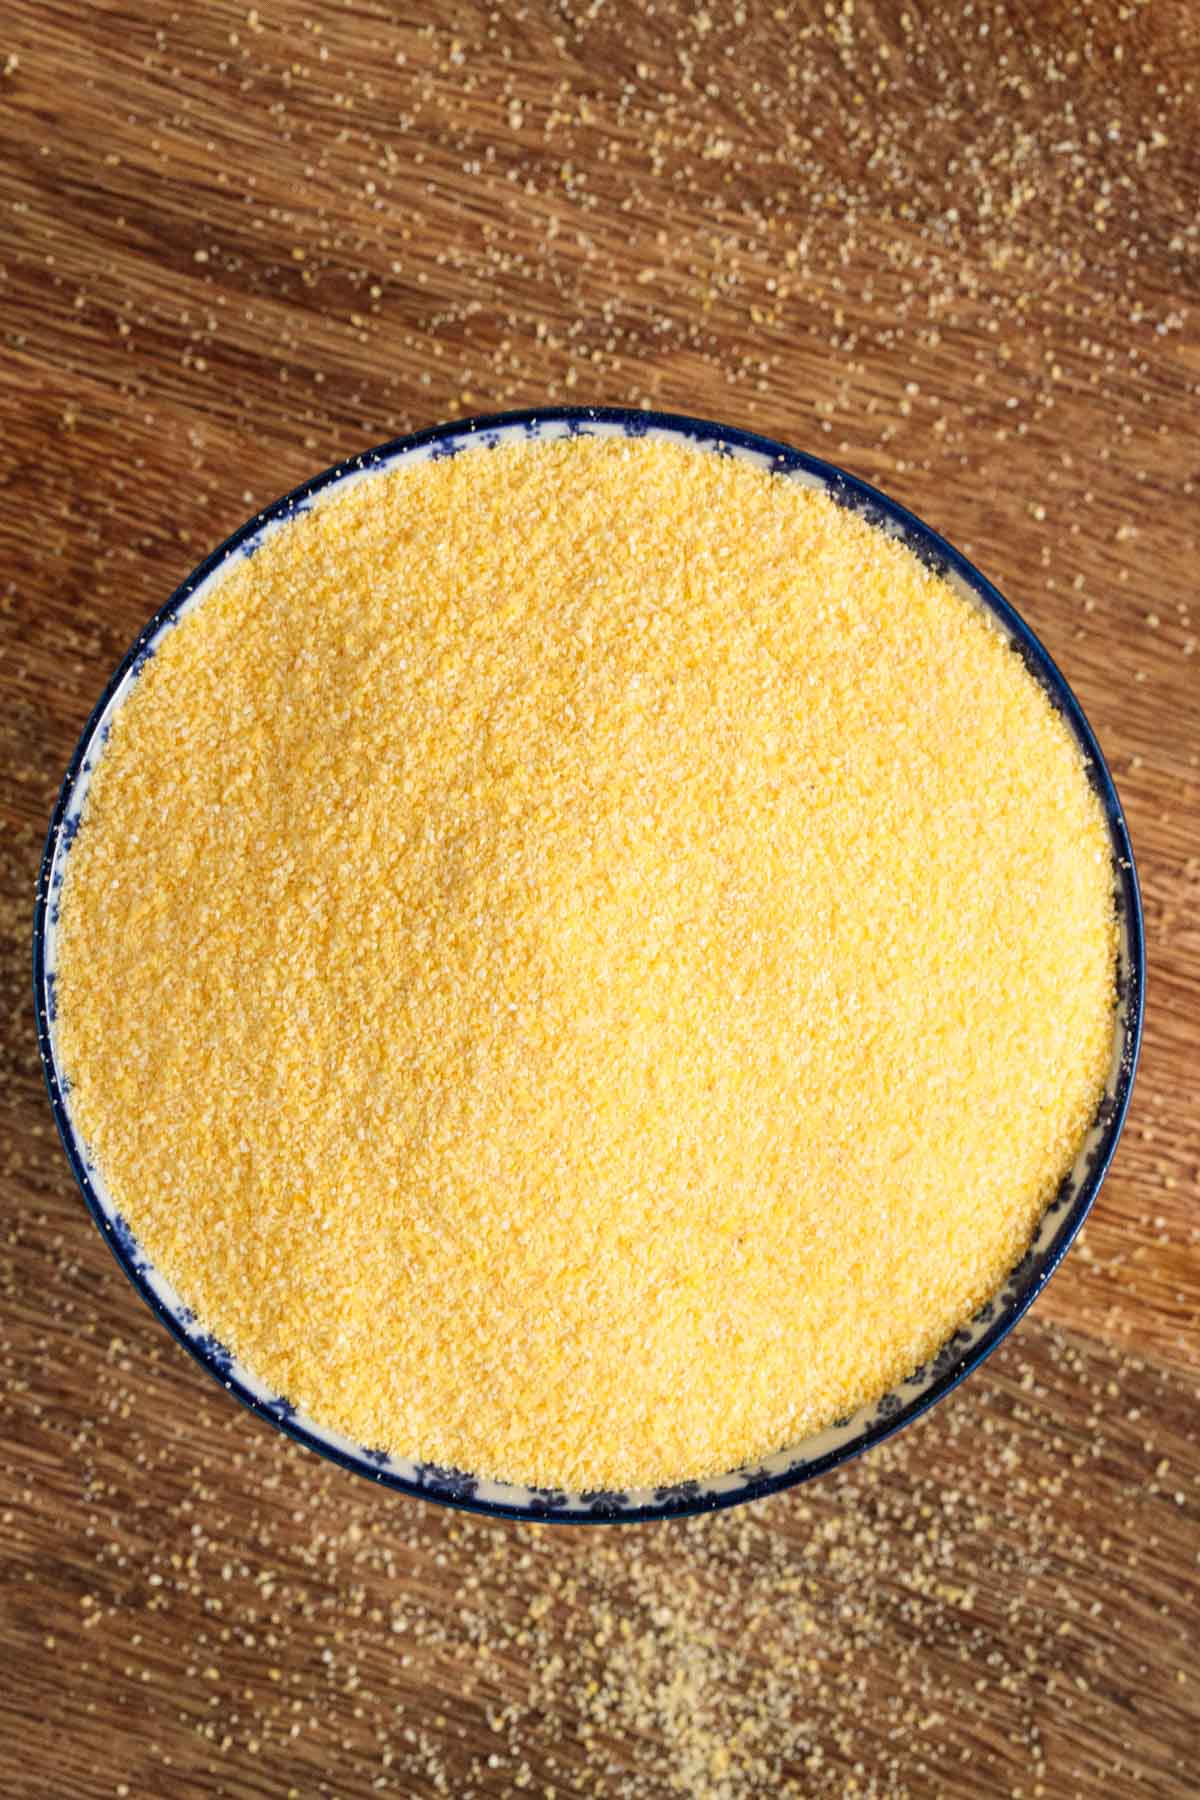 Overhead photo of a bowl of uncooked polenta.